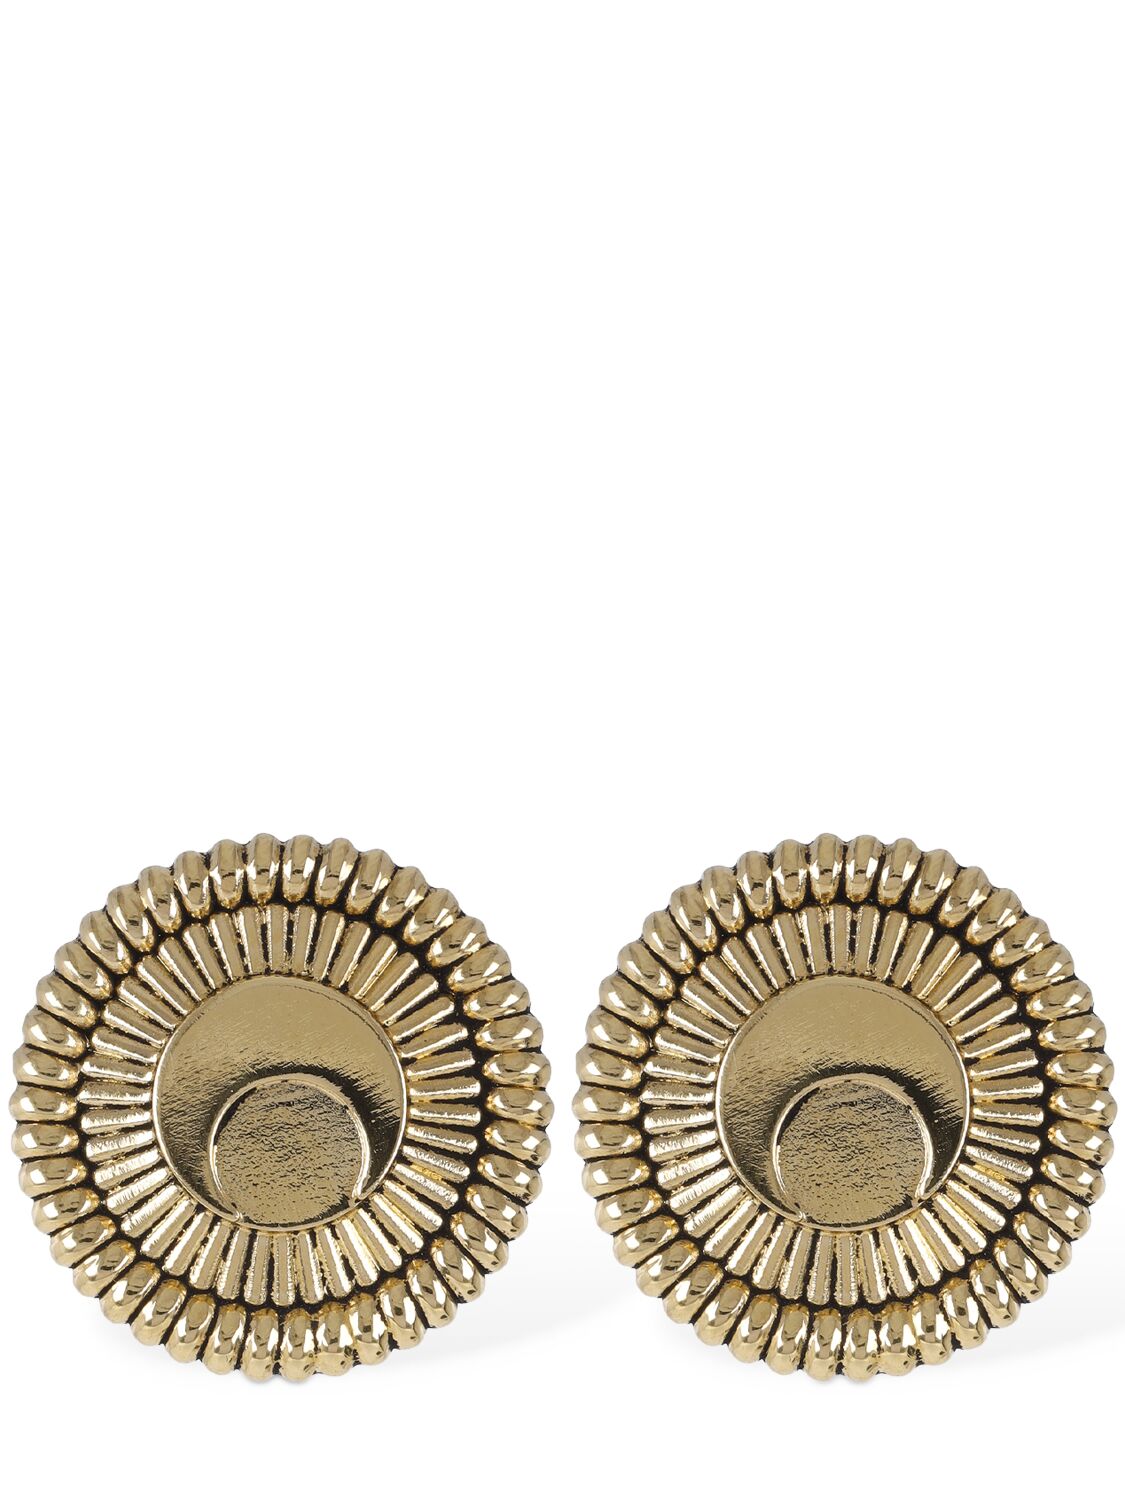 Image of Regenerated Statement Button Earrings